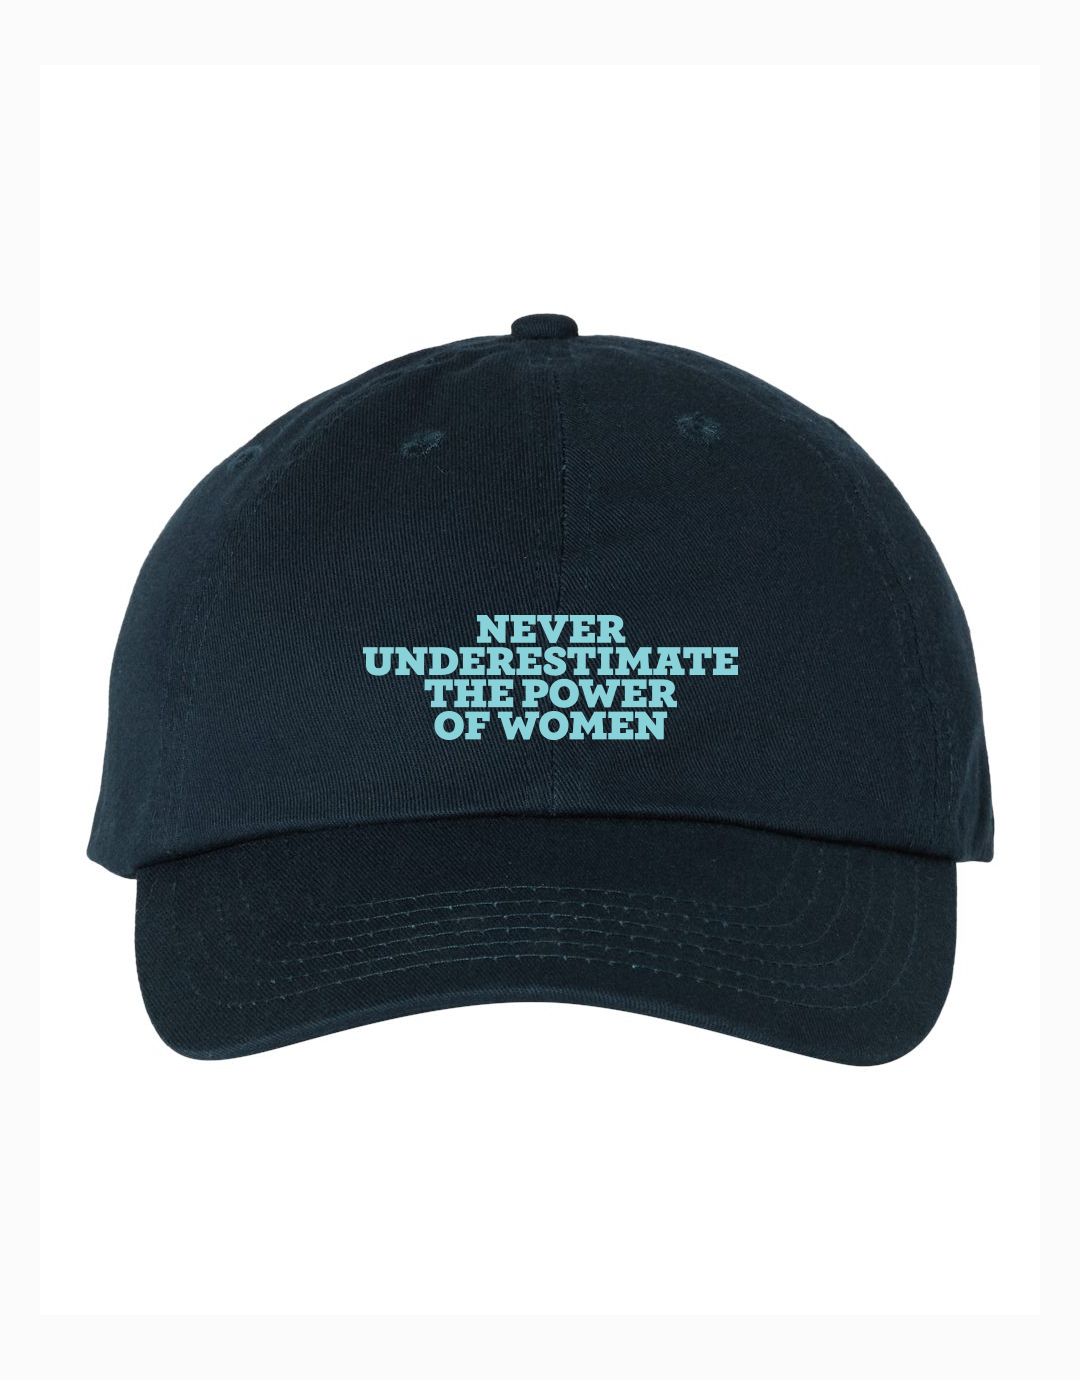 Never Underestimate the Power of Women Hat